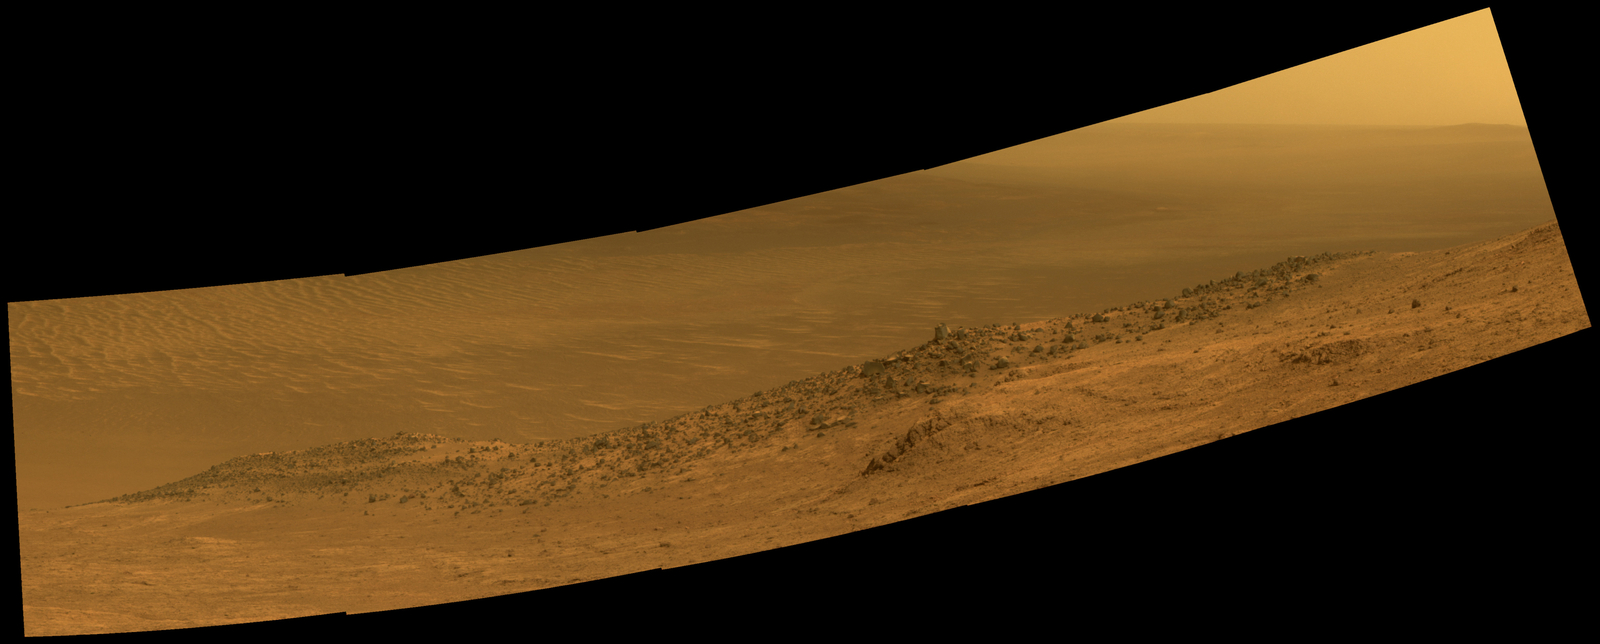 This scene from NASA's Mars rover Opportunity shows "Wharton Ridge," which forms part of the southern wall of "Marathon Valley" on the rim of Endeavour Crater. The ridge's name honors the memory of astrobiologist Robert A. Wharton (1951-2012). The scene is presented in approximately true color.